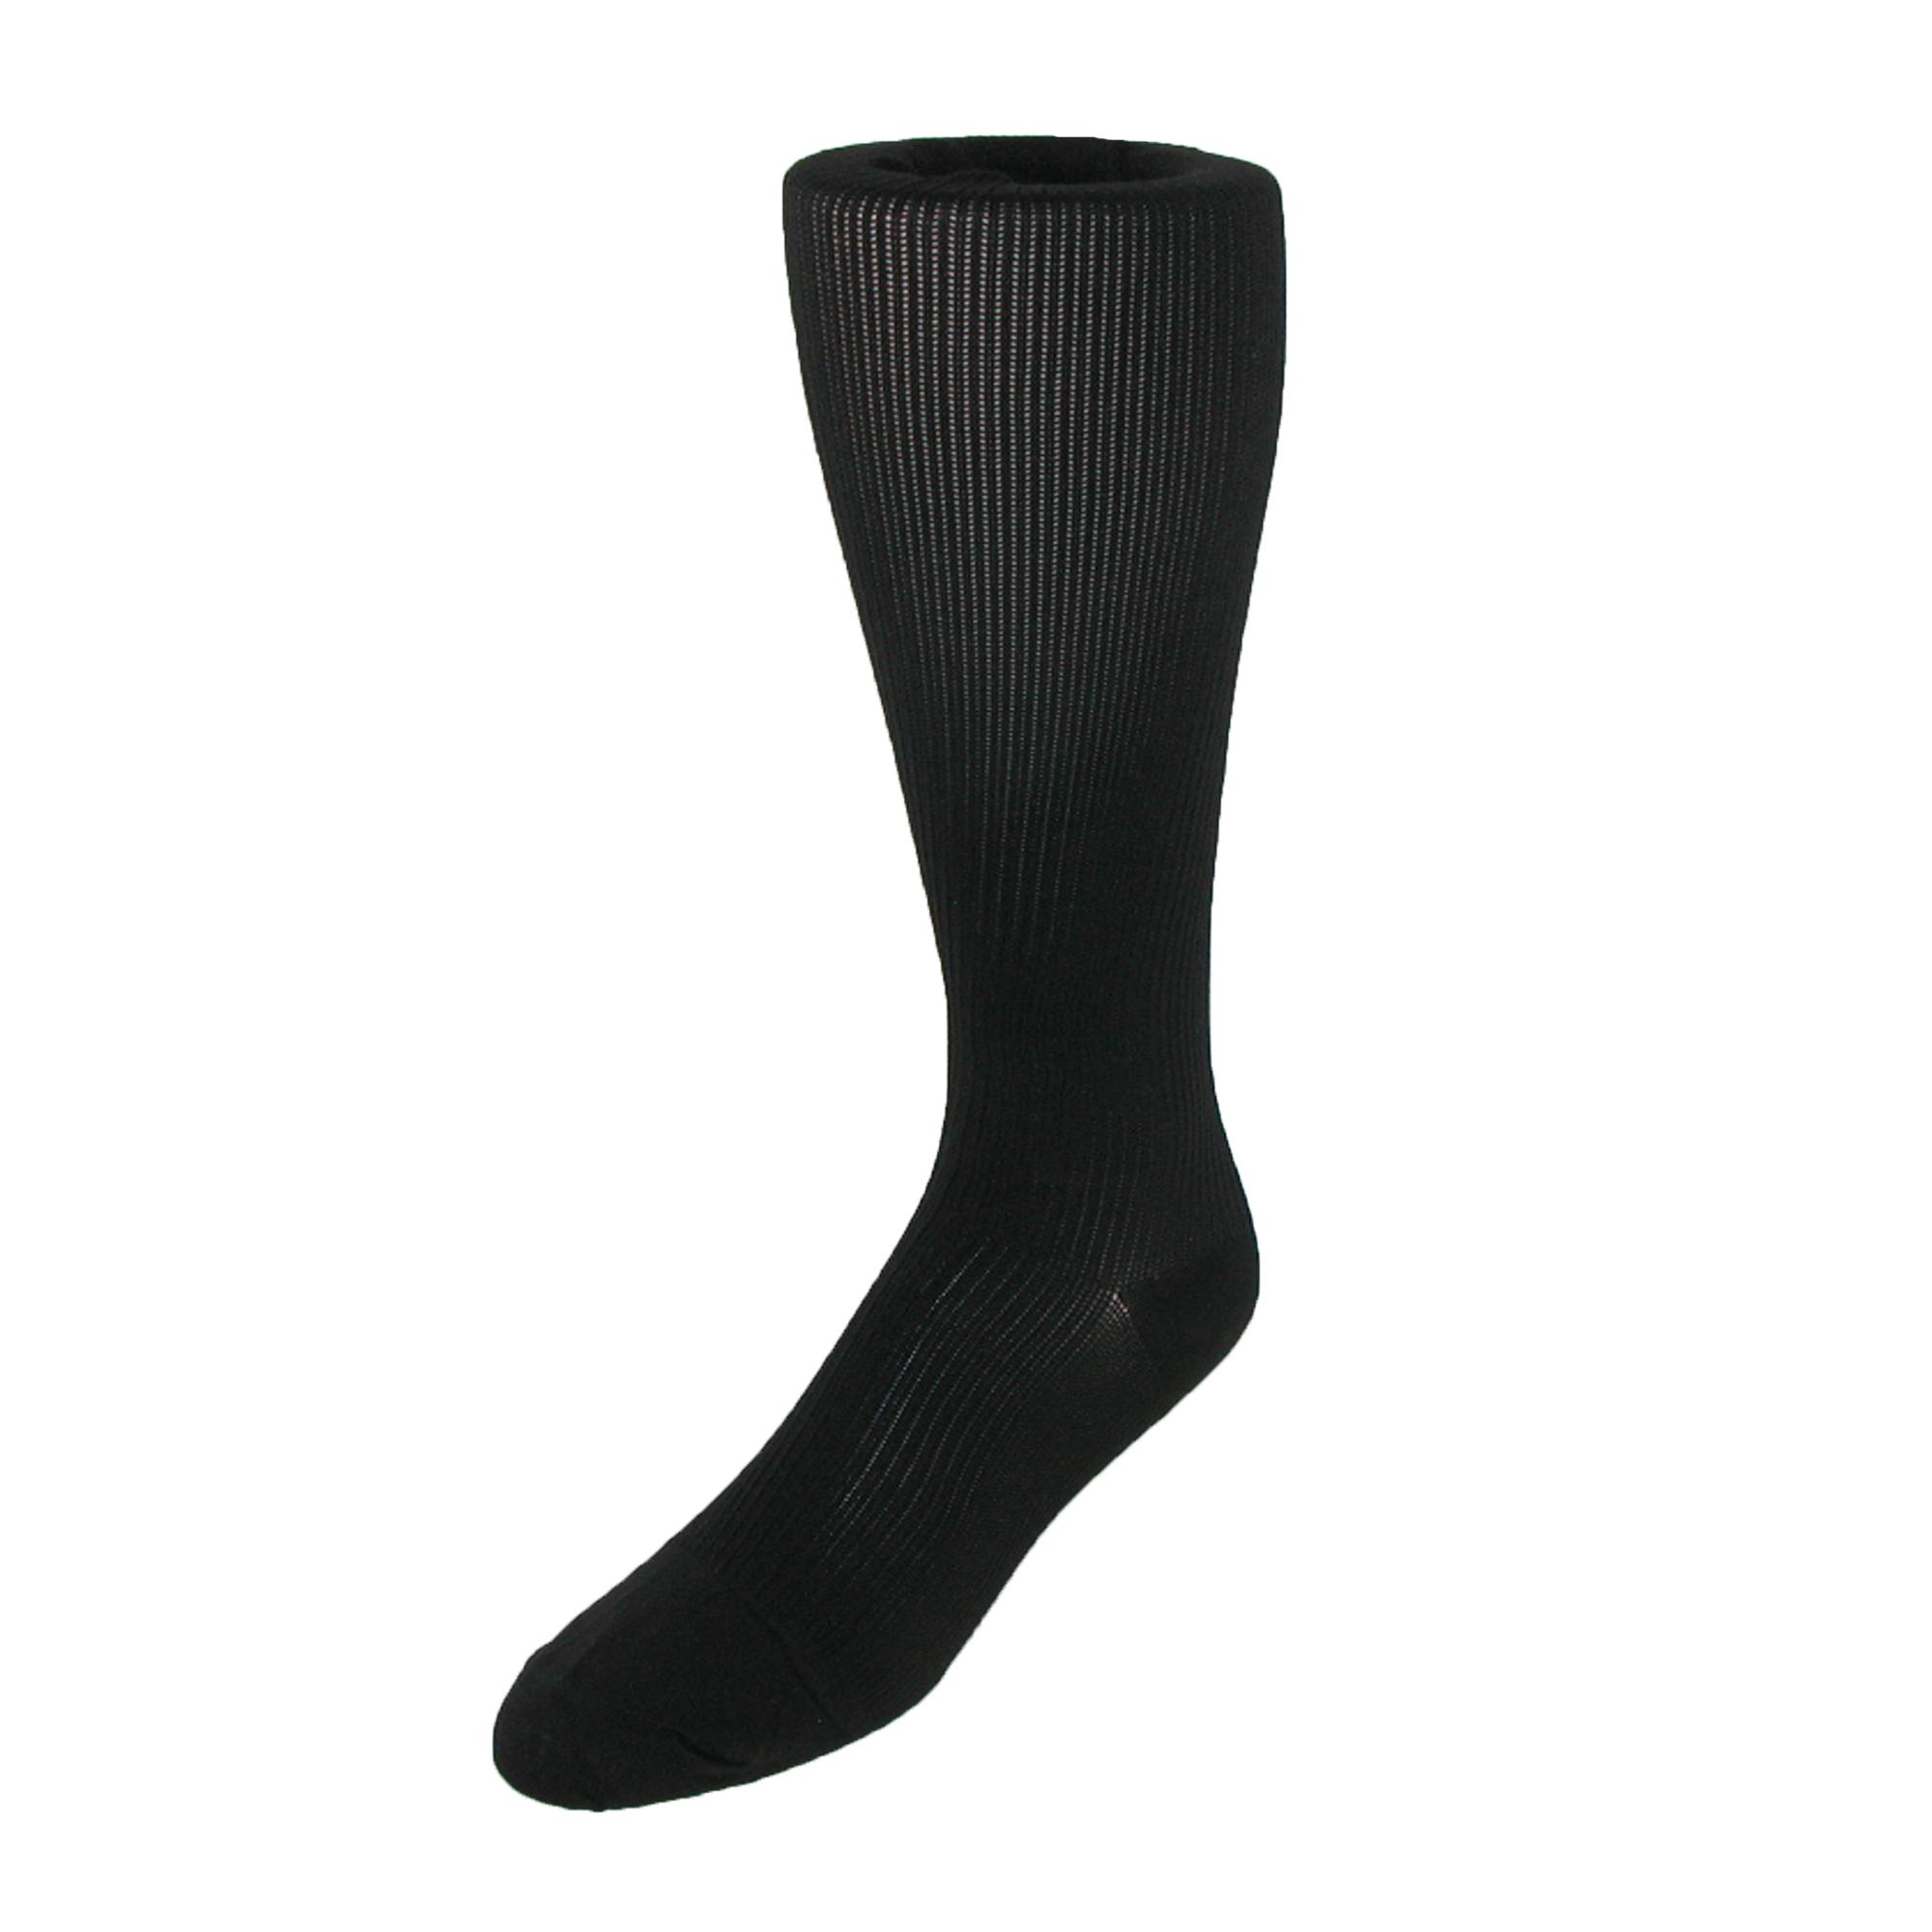 Jefferies Socks Firm Support Over the Calf Compression Dress Socks